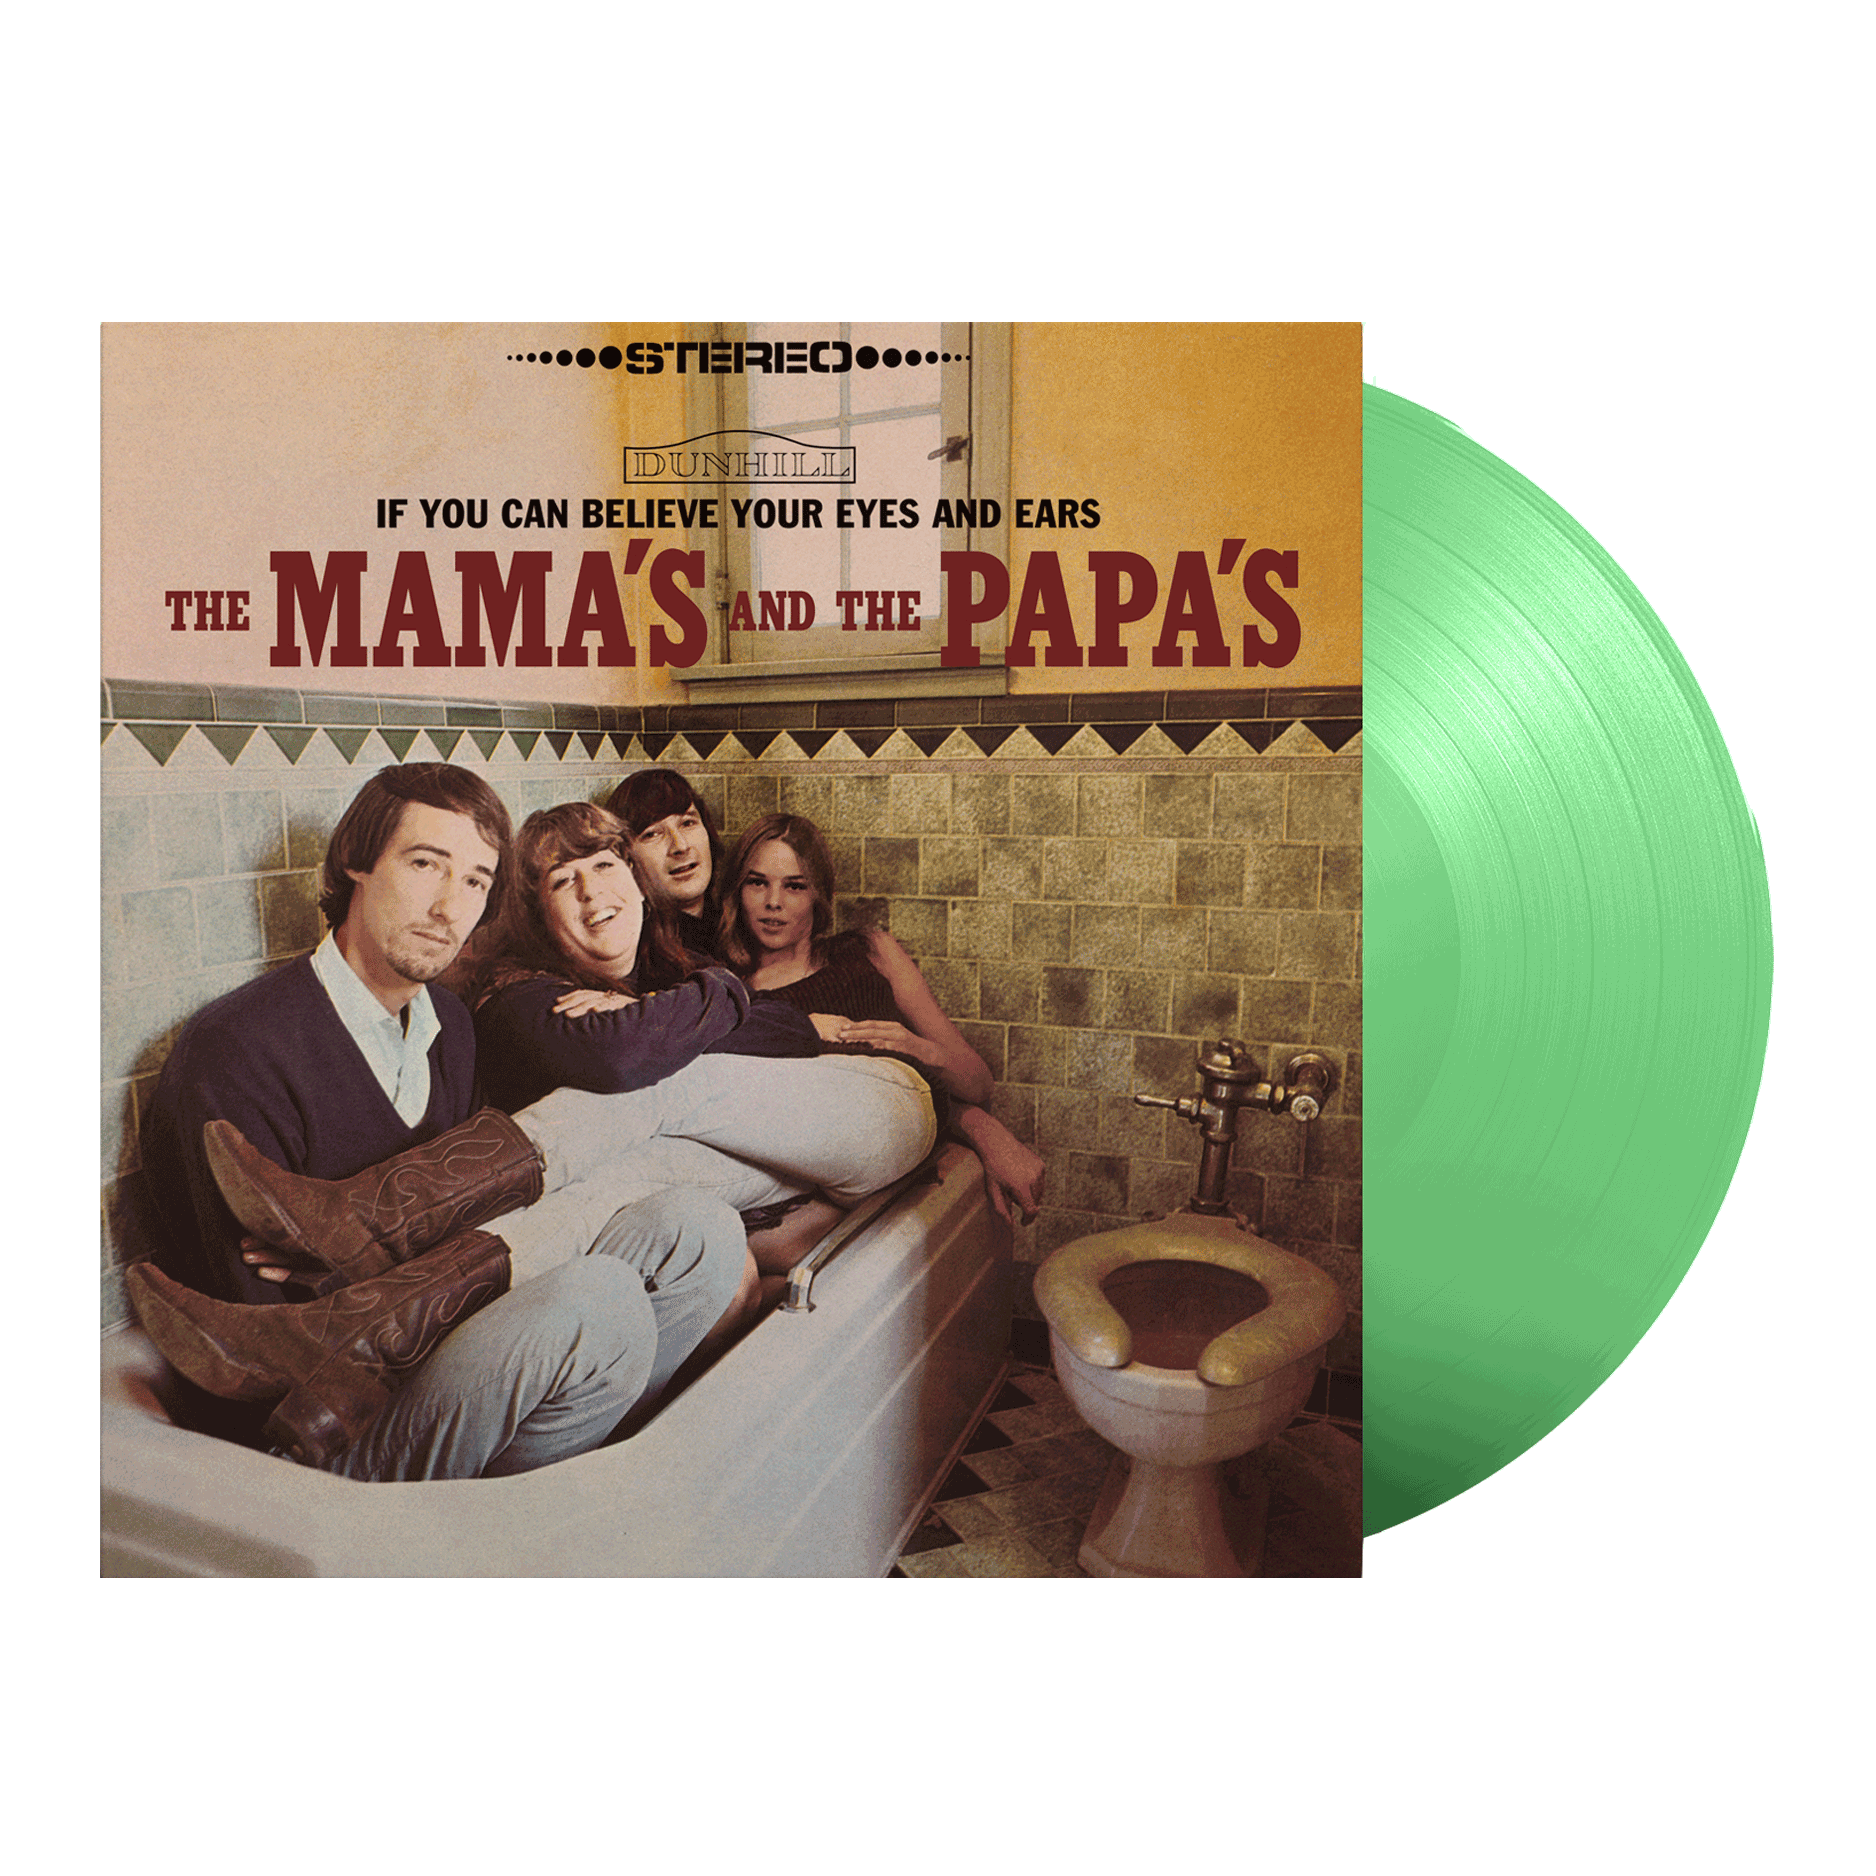 The Mamas & The Papas - If You Can Believe Your Eyes And Ears: Limited Green Vinyl LP